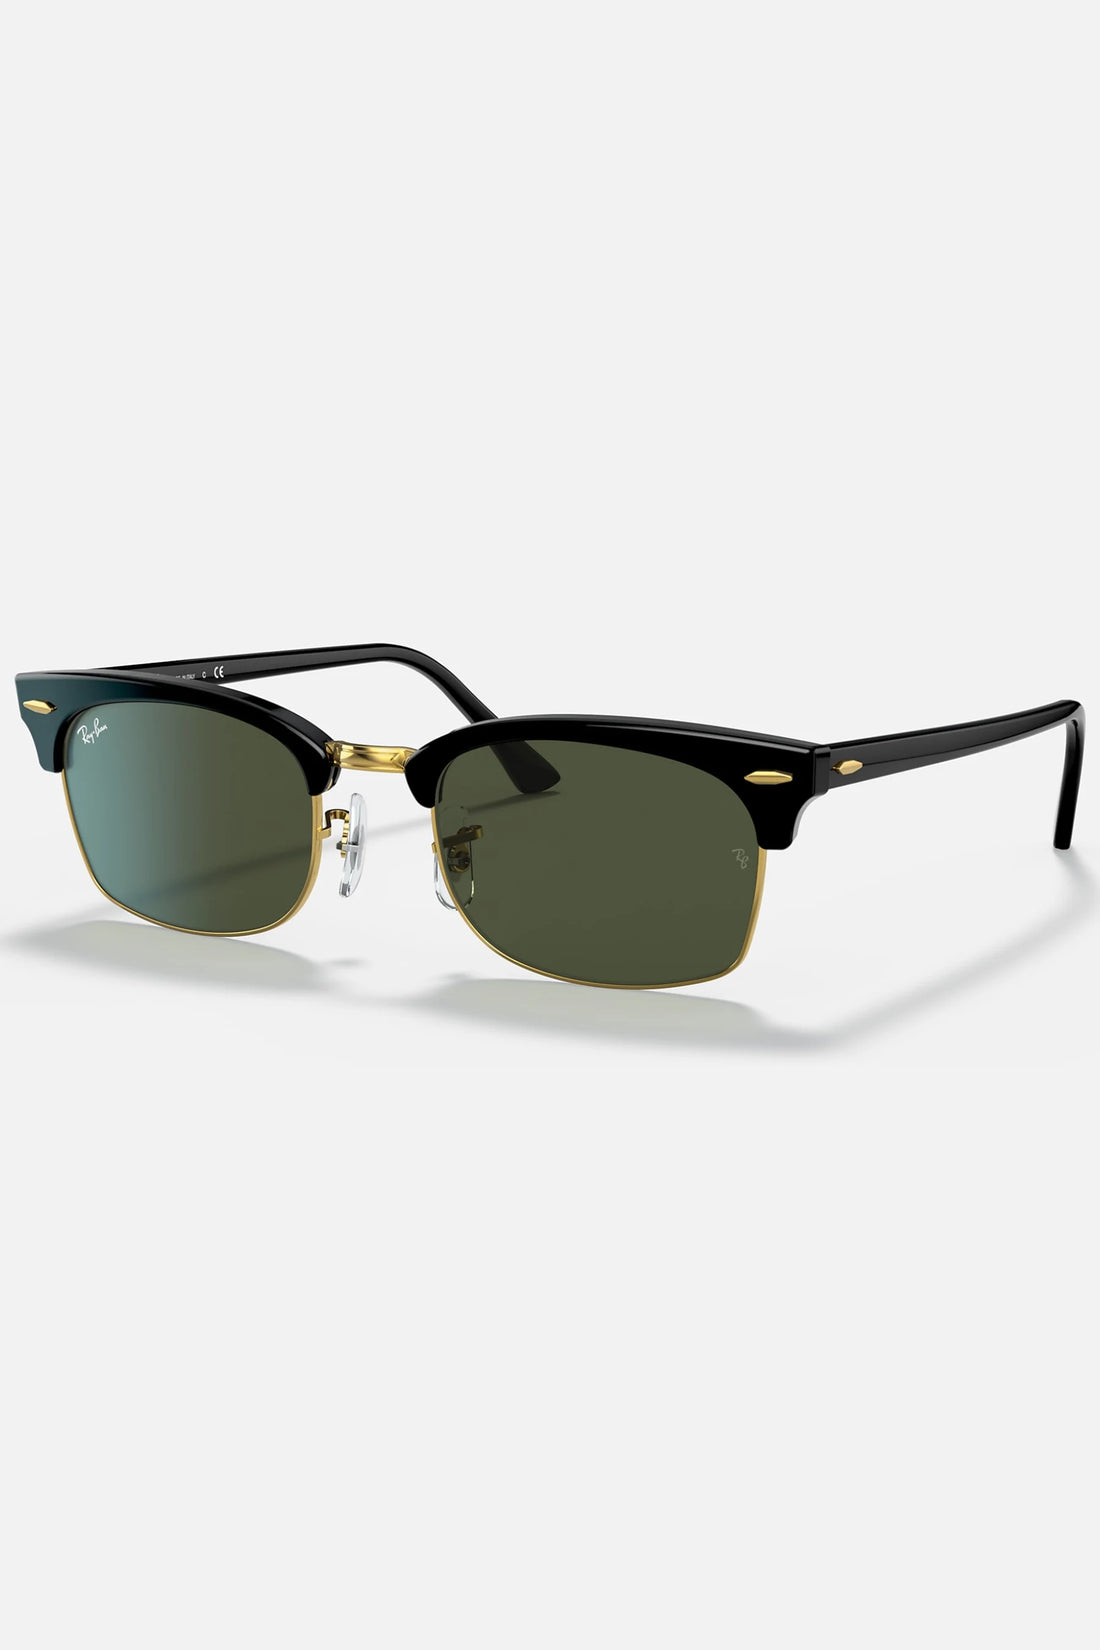 Ray-Ban RB3916 130331 Clubmaster Square Legend Gold